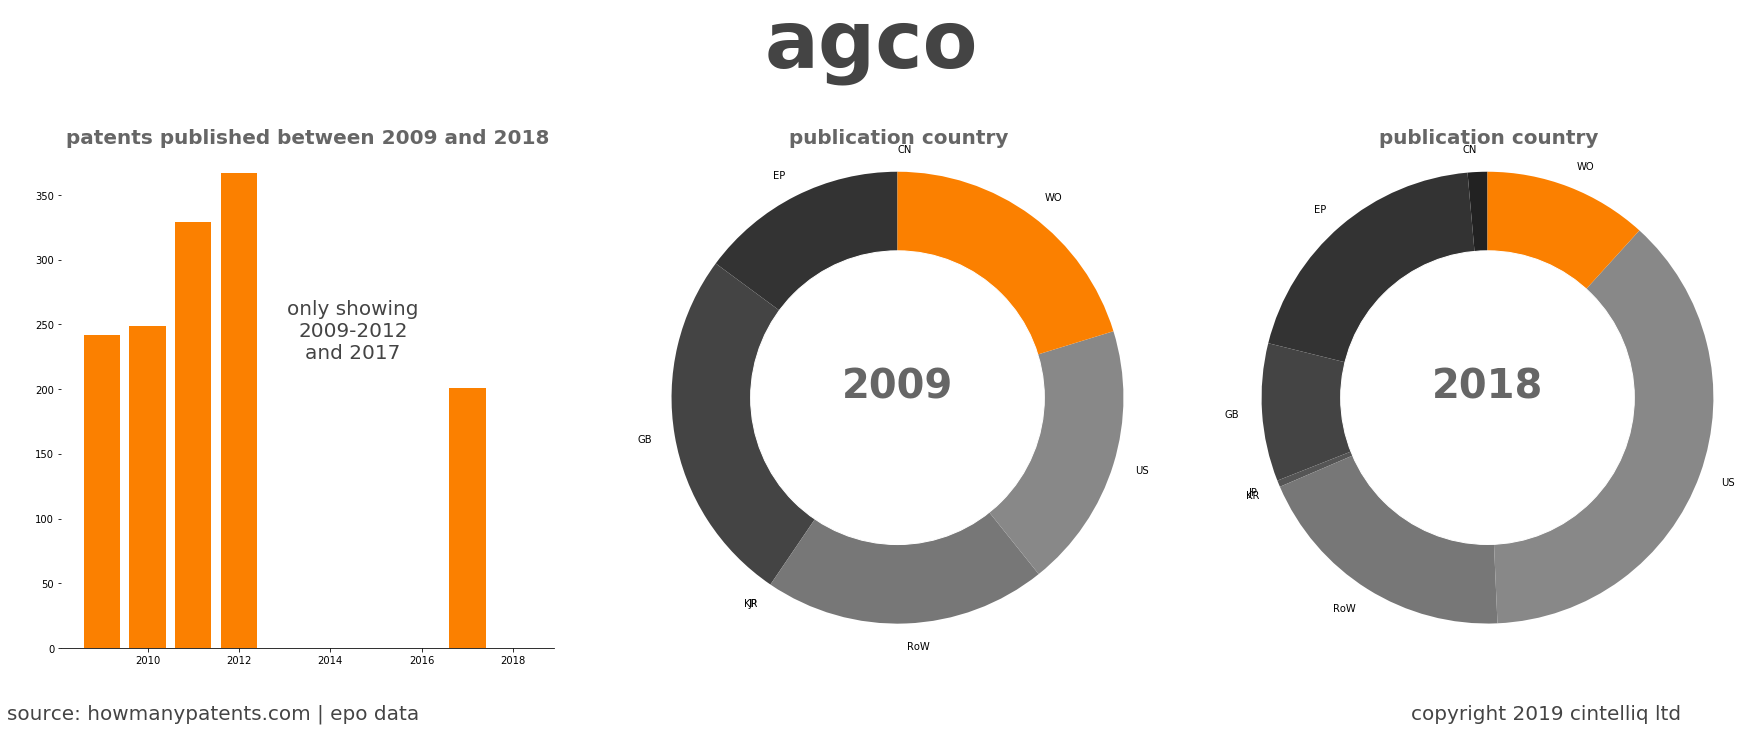 summary of patents for Agco